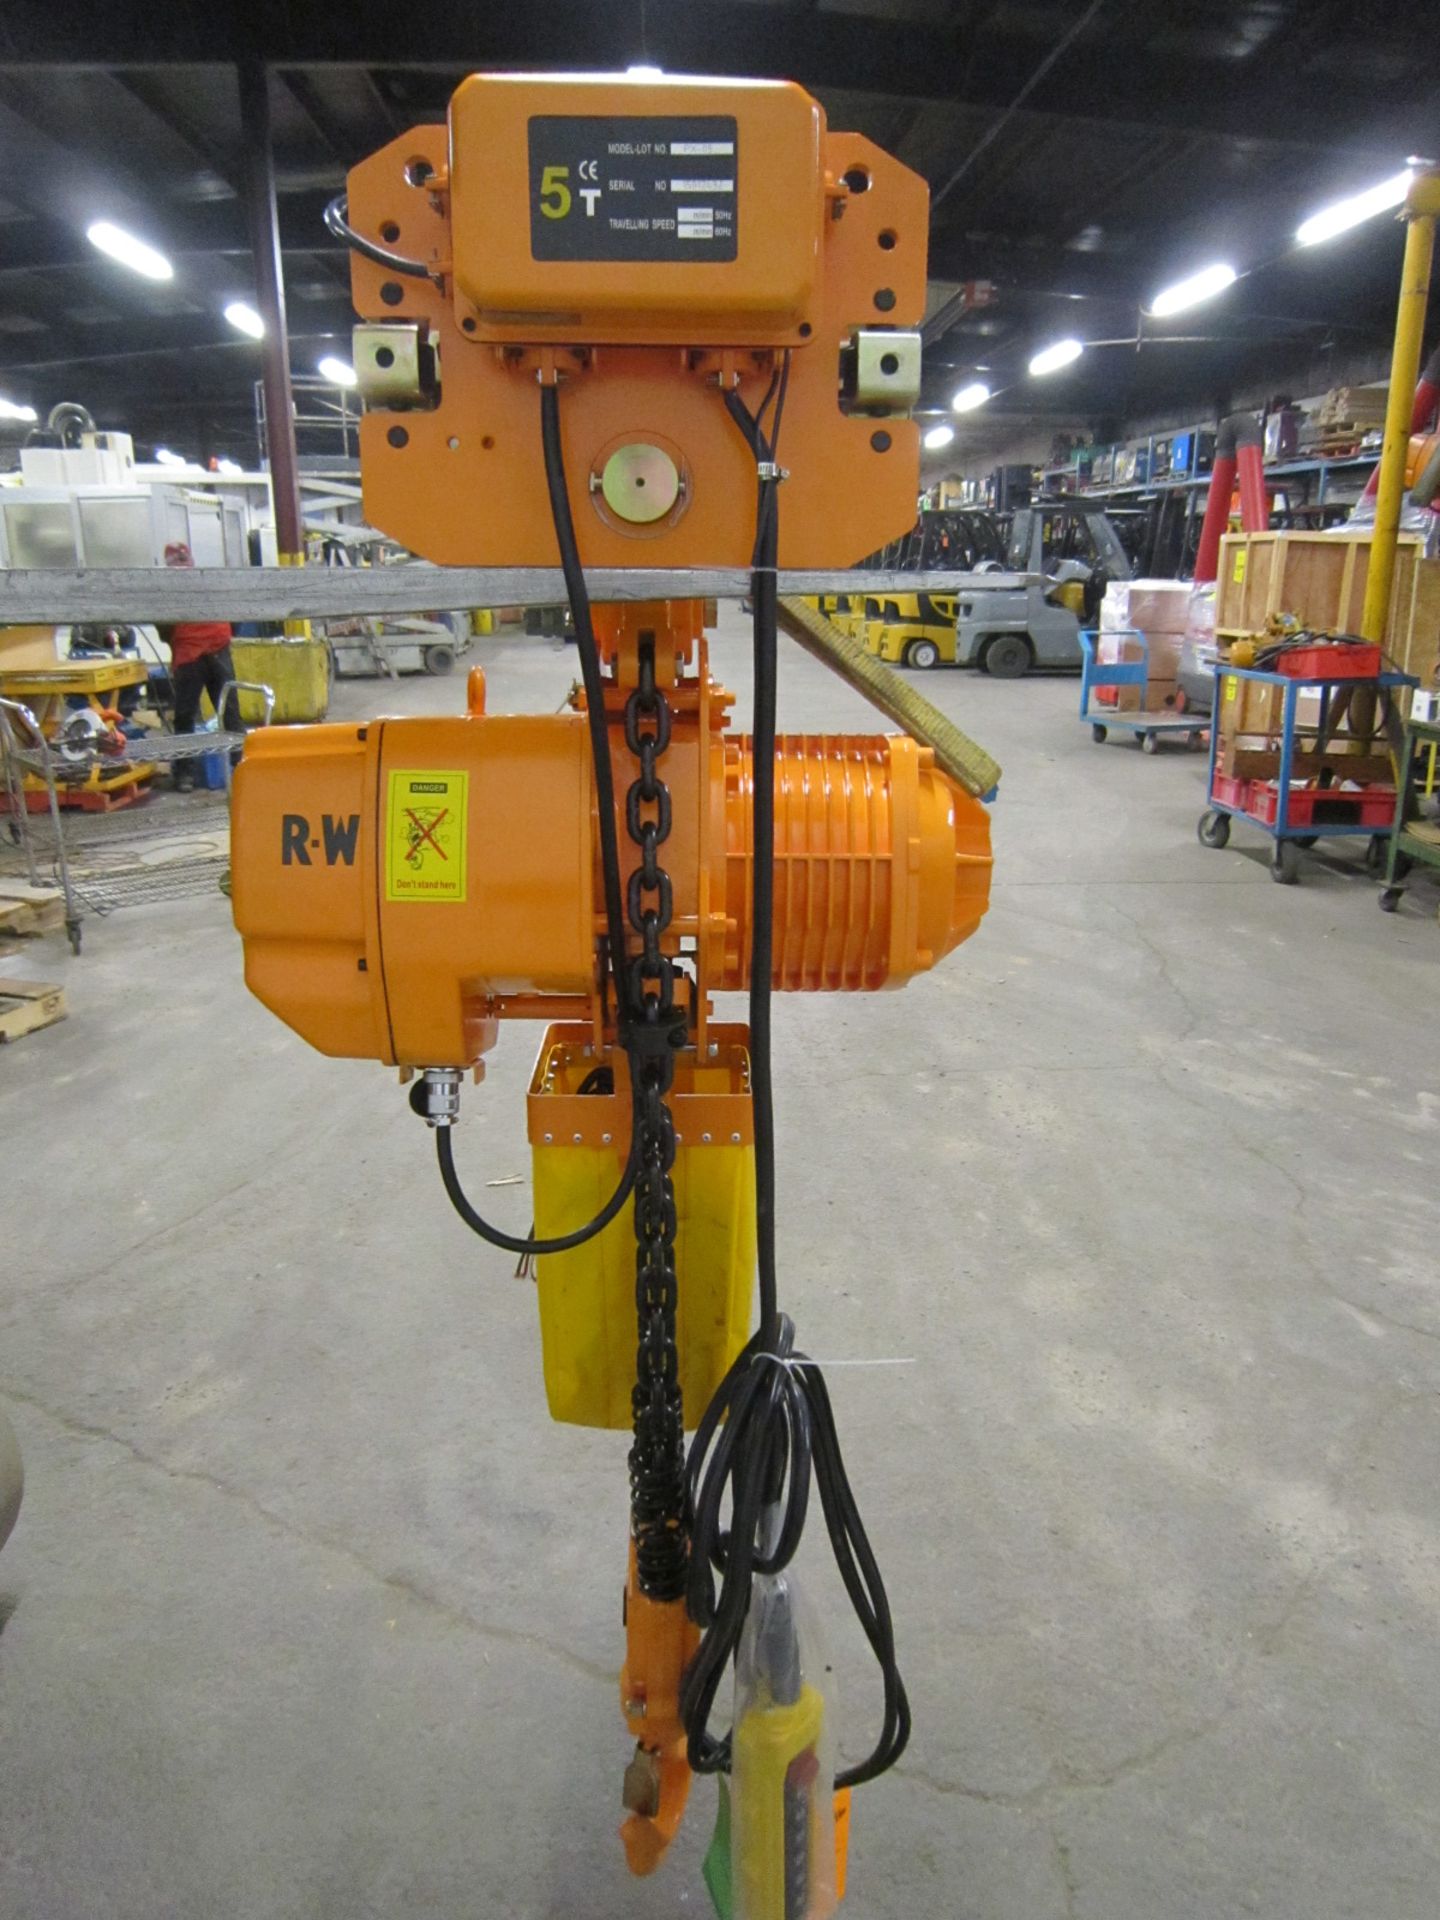 RW 5 Ton Electric chain hoist with power trolley and 8 button pendant controller - 220V - 20 foot - Image 2 of 3